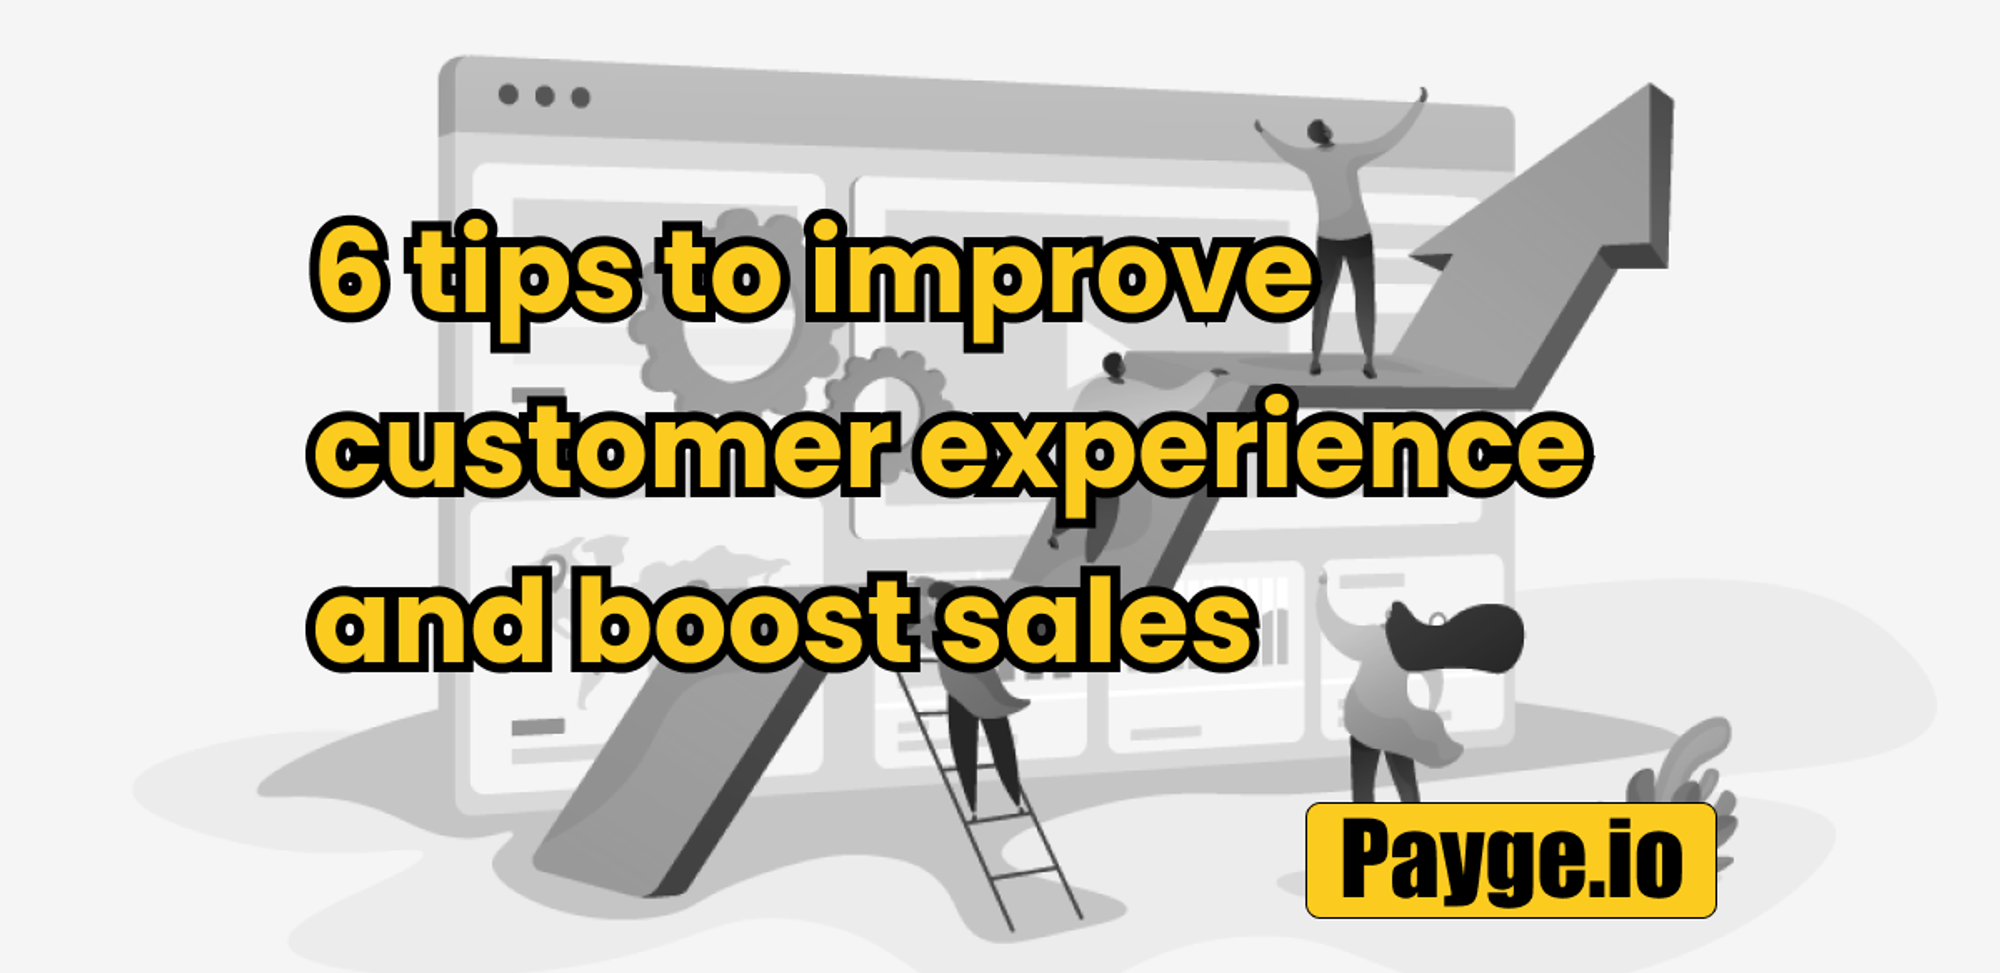 6 tips to improve customer experience and boost sales - Payge